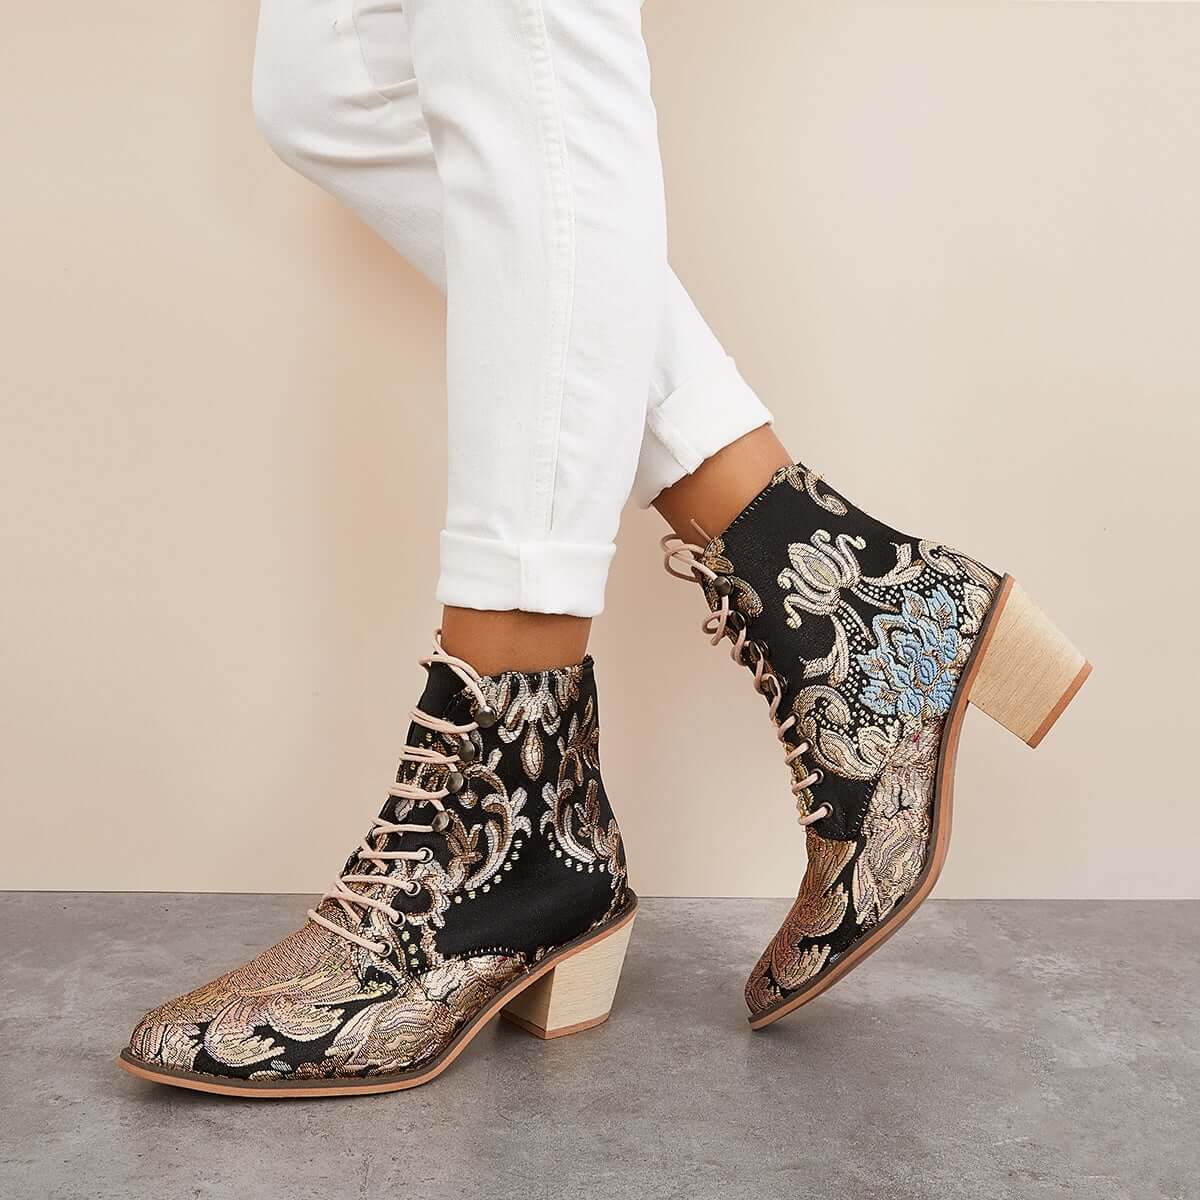 Veooy Retro Embroidered Cowboy Ankle Boots Block Heel Western Booties